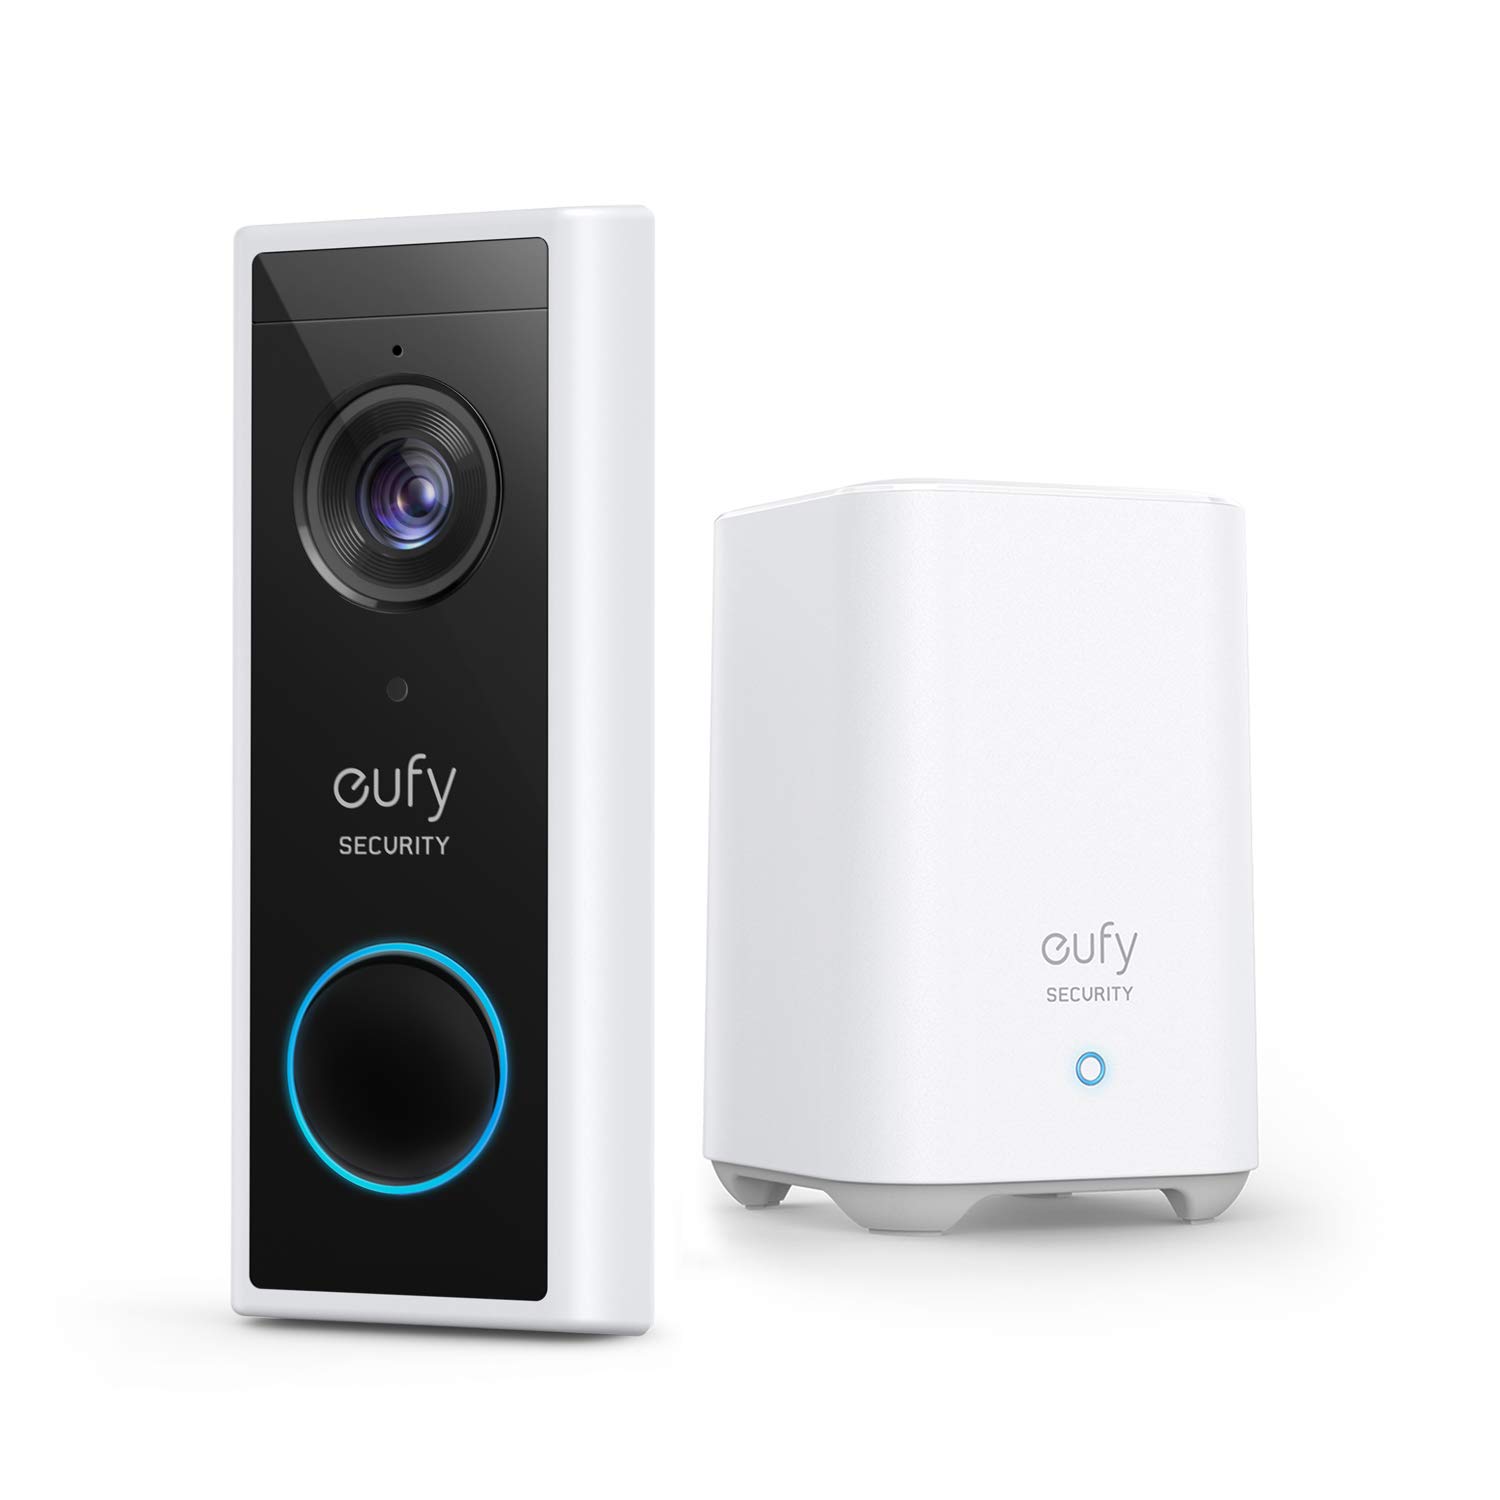 Amazon Eufy Deals Up To 42% Off: Eufy Security Products.